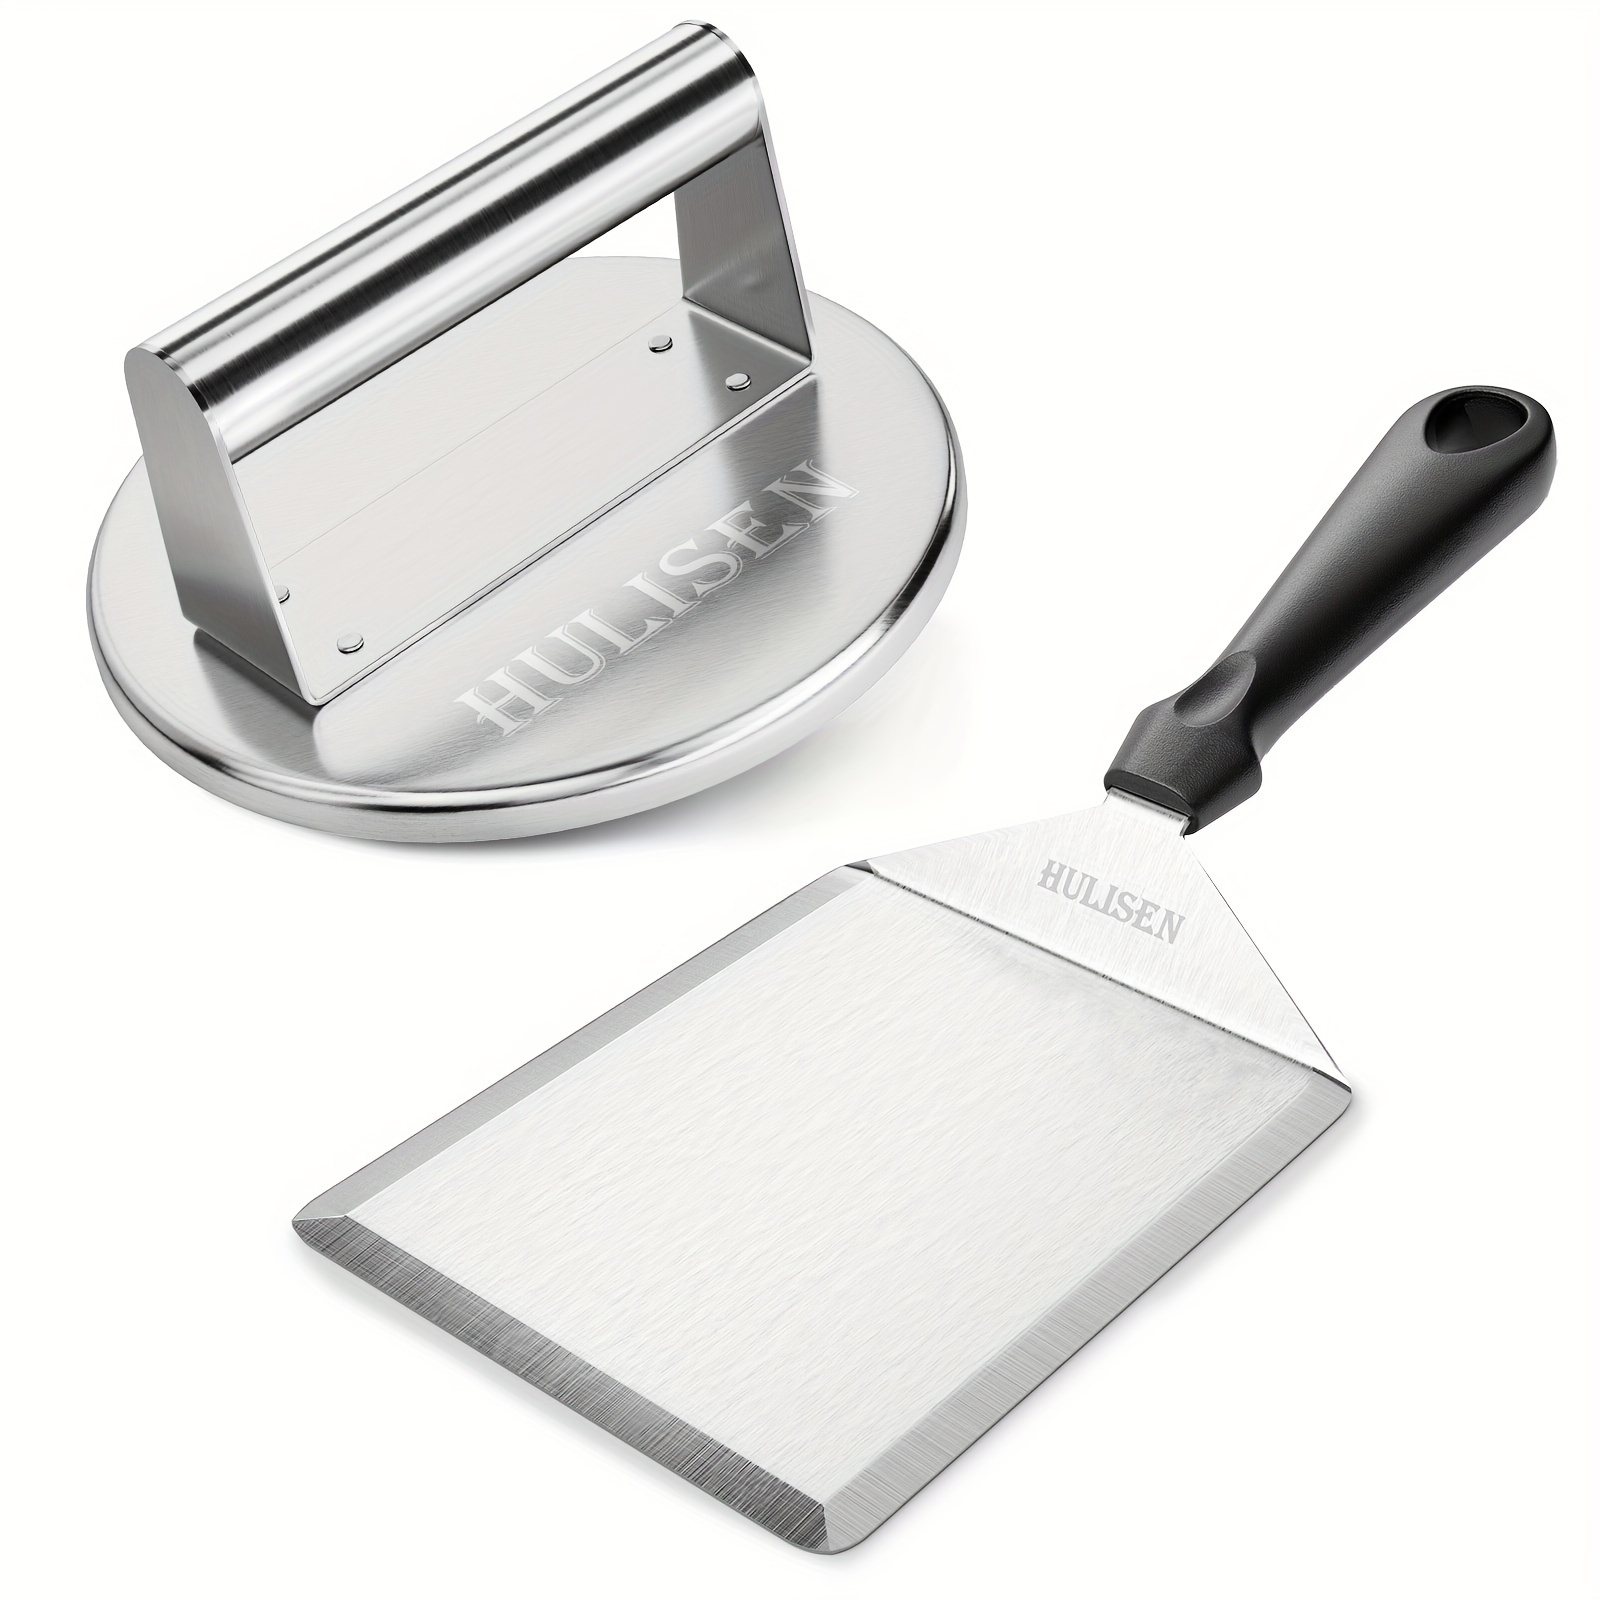 

Griddle Accessories For Blackstone, Smashed Burger Press Kit, Stainless Steel Burger Press With Raised Edge & Burger Spatula, Professional Hamburger Grill Press For Griddle Cooking